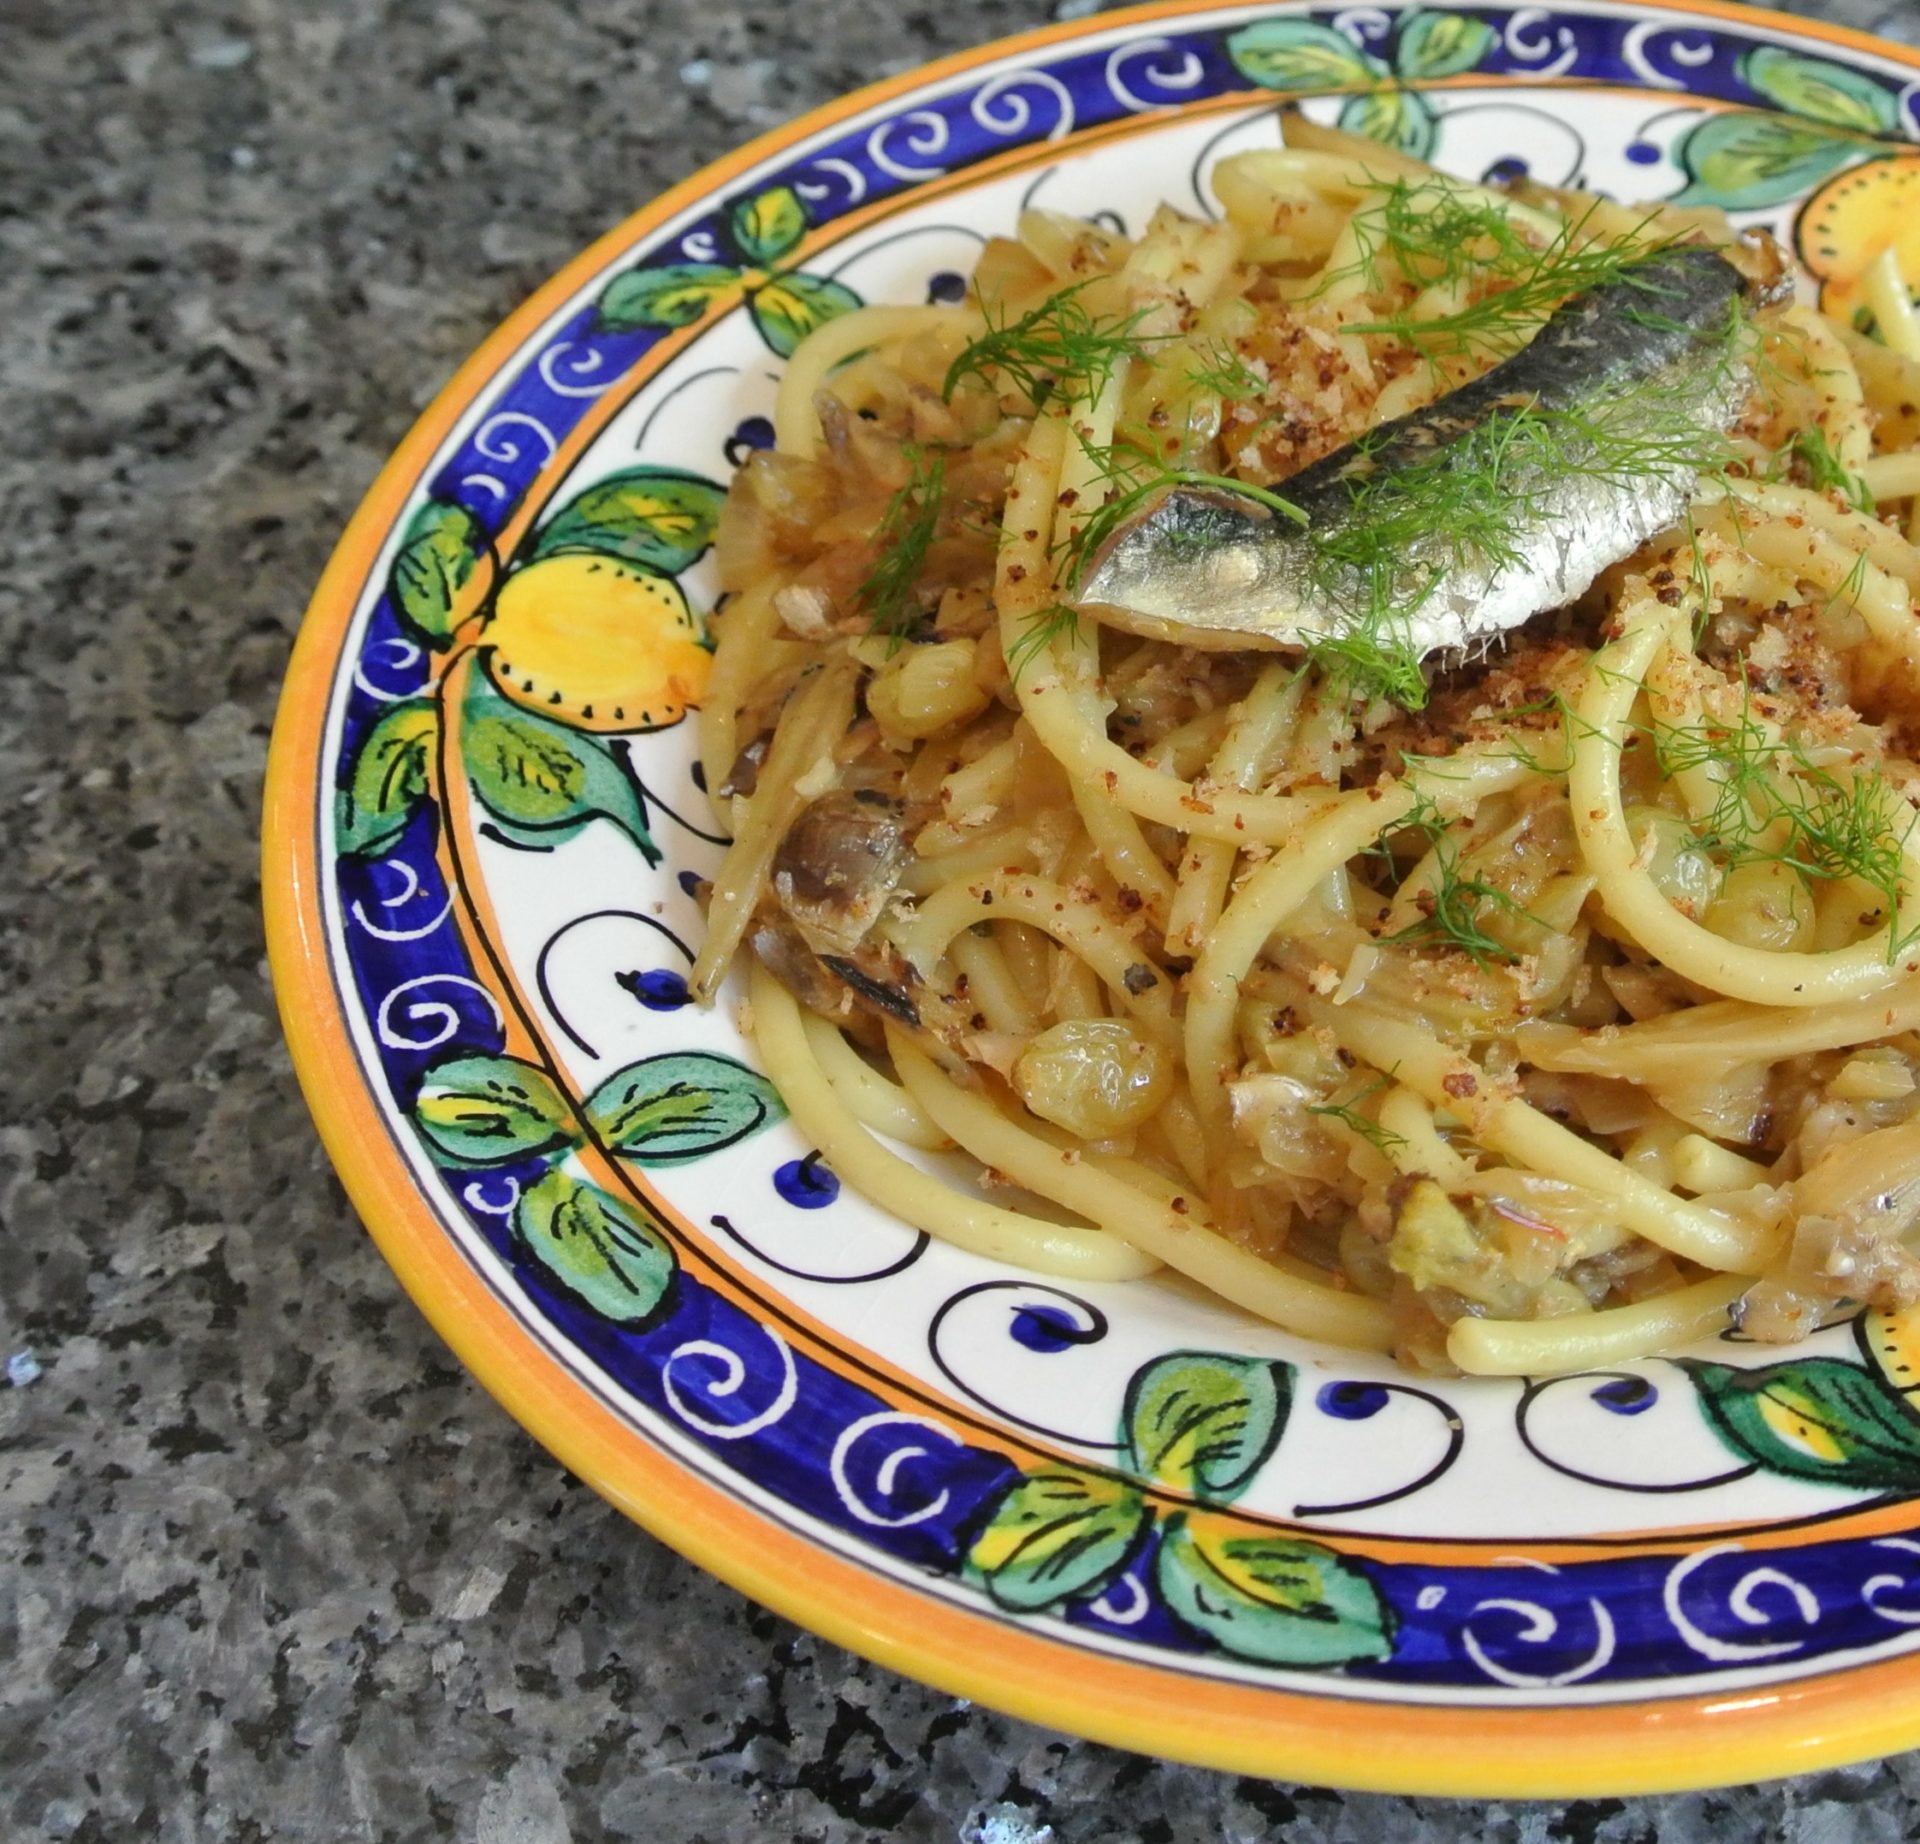 Pasta con le sarde (Pasta with sardines) - The national dish of Sicily ...